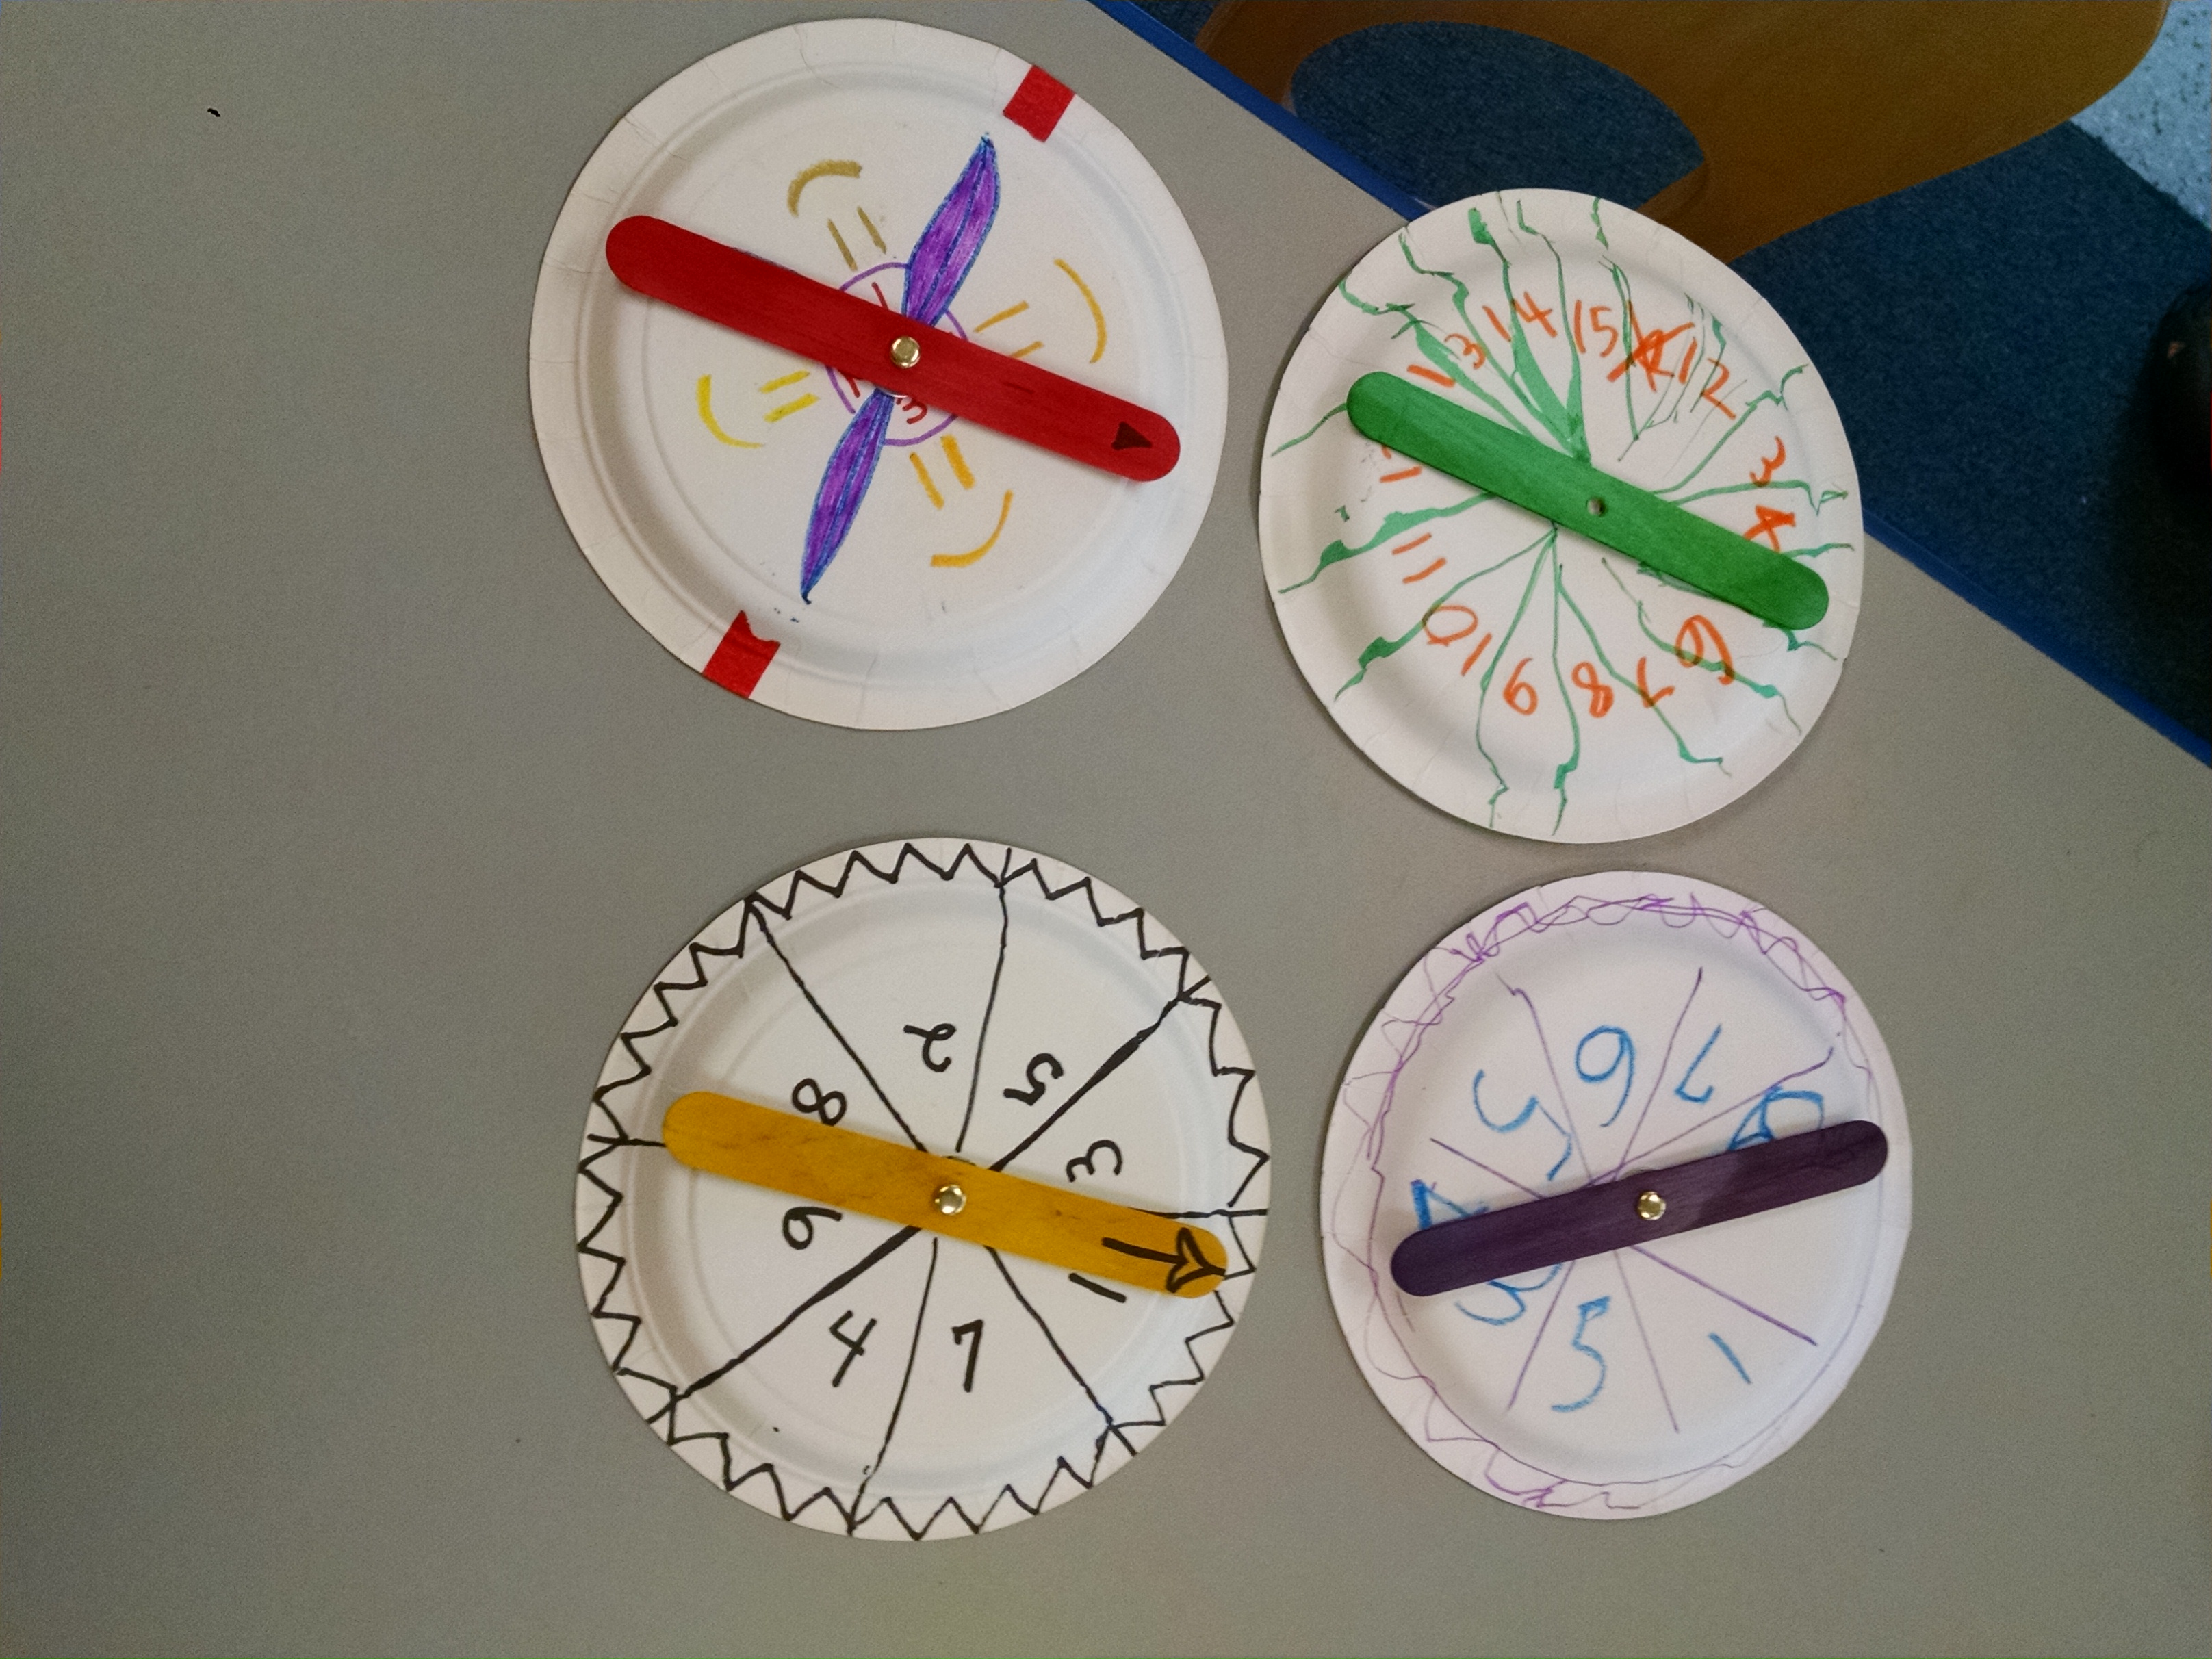 What are six simple machine models kids can make for a physics lesson?